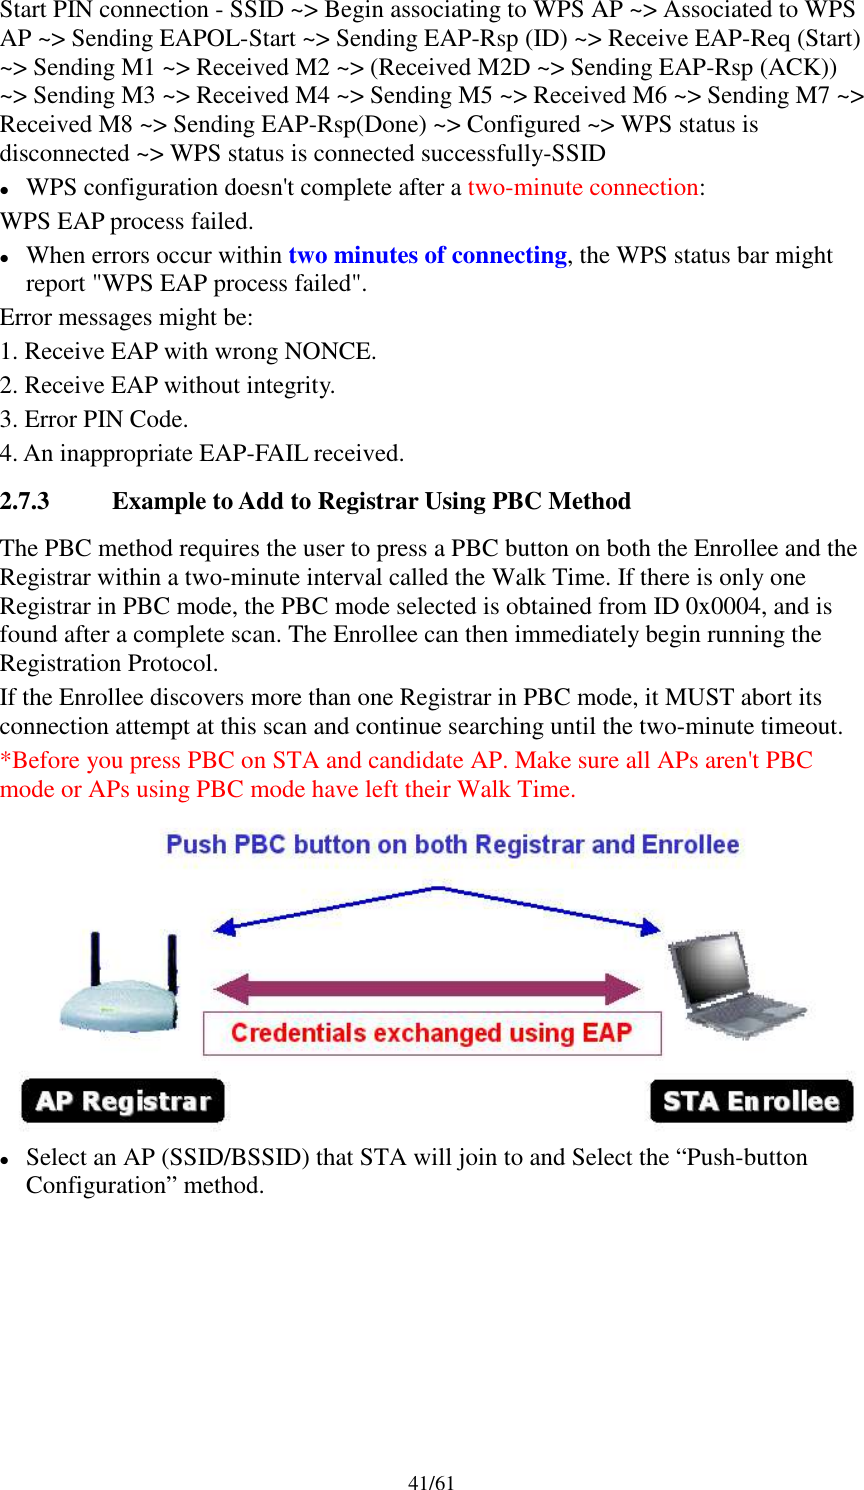 41/61Start PIN connection - SSID ~&gt; Begin associating to WPS AP ~&gt; Associated to WPSAP ~&gt; Sending EAPOL-Start ~&gt; Sending EAP-Rsp (ID) ~&gt; Receive EAP-Req (Start)~&gt; Sending M1 ~&gt; Received M2 ~&gt; (Received M2D ~&gt; Sending EAP-Rsp (ACK))~&gt; Sending M3 ~&gt; Received M4 ~&gt; Sending M5 ~&gt; Received M6 ~&gt; Sending M7 ~&gt;Received M8 ~&gt; Sending EAP-Rsp(Done) ~&gt; Configured ~&gt; WPS status isdisconnected ~&gt; WPS status is connected successfully-SSIDWPS configuration doesn&apos;t complete after a two-minute connection:WPS EAP process failed.When errors occur within two minutes of connecting, the WPS status bar mightreport &quot;WPS EAP process failed&quot;.Error messages might be:1. Receive EAP with wrong NONCE.2. Receive EAP without integrity.3. Error PIN Code.4. An inappropriate EAP-FAIL received.2.7.3 Example to Add to Registrar Using PBC MethodThe PBC method requires the user to press a PBC button on both the Enrollee and theRegistrar within a two-minute interval called the Walk Time. If there is only oneRegistrar in PBC mode, the PBC mode selected is obtained from ID 0x0004, and isfound after a complete scan. The Enrollee can then immediately begin running theRegistration Protocol.If the Enrollee discovers more than one Registrar in PBC mode, it MUST abort itsconnection attempt at this scan and continue searching until the two-minute timeout.*Before you press PBC on STA and candidate AP. Make sure all APs aren&apos;t PBCmode or APs using PBC mode have left their Walk Time.Select an AP (SSID/BSSID) that STA will join to and Select the “Push-buttonConfiguration” method.